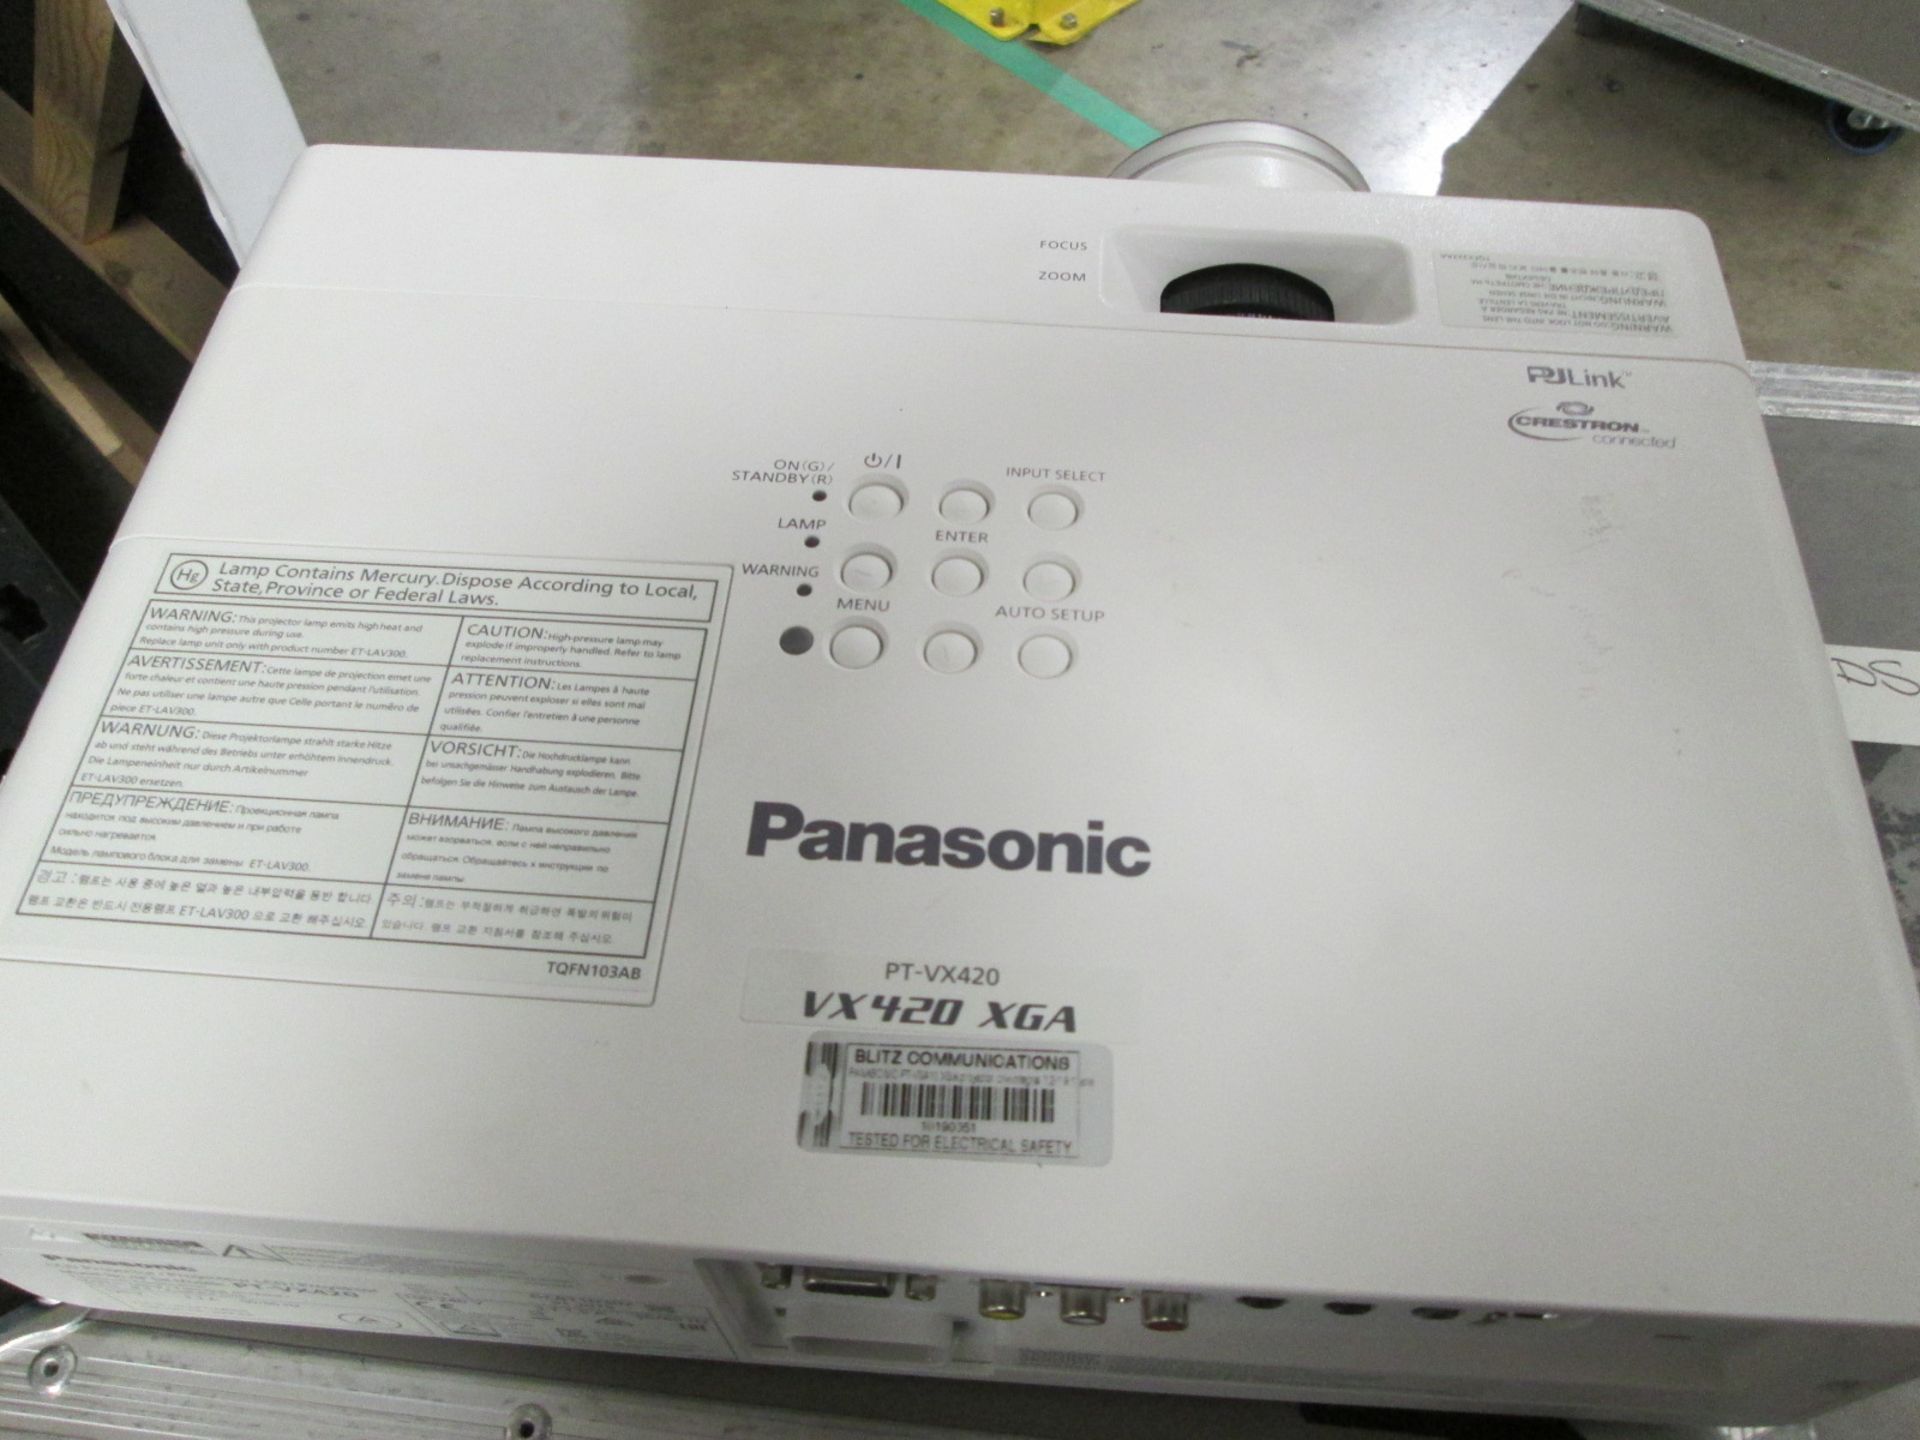 Panasonic PT-VX420 LCD Projector, S/N DC8110320, YOM 2018, In flight case - Image 2 of 6